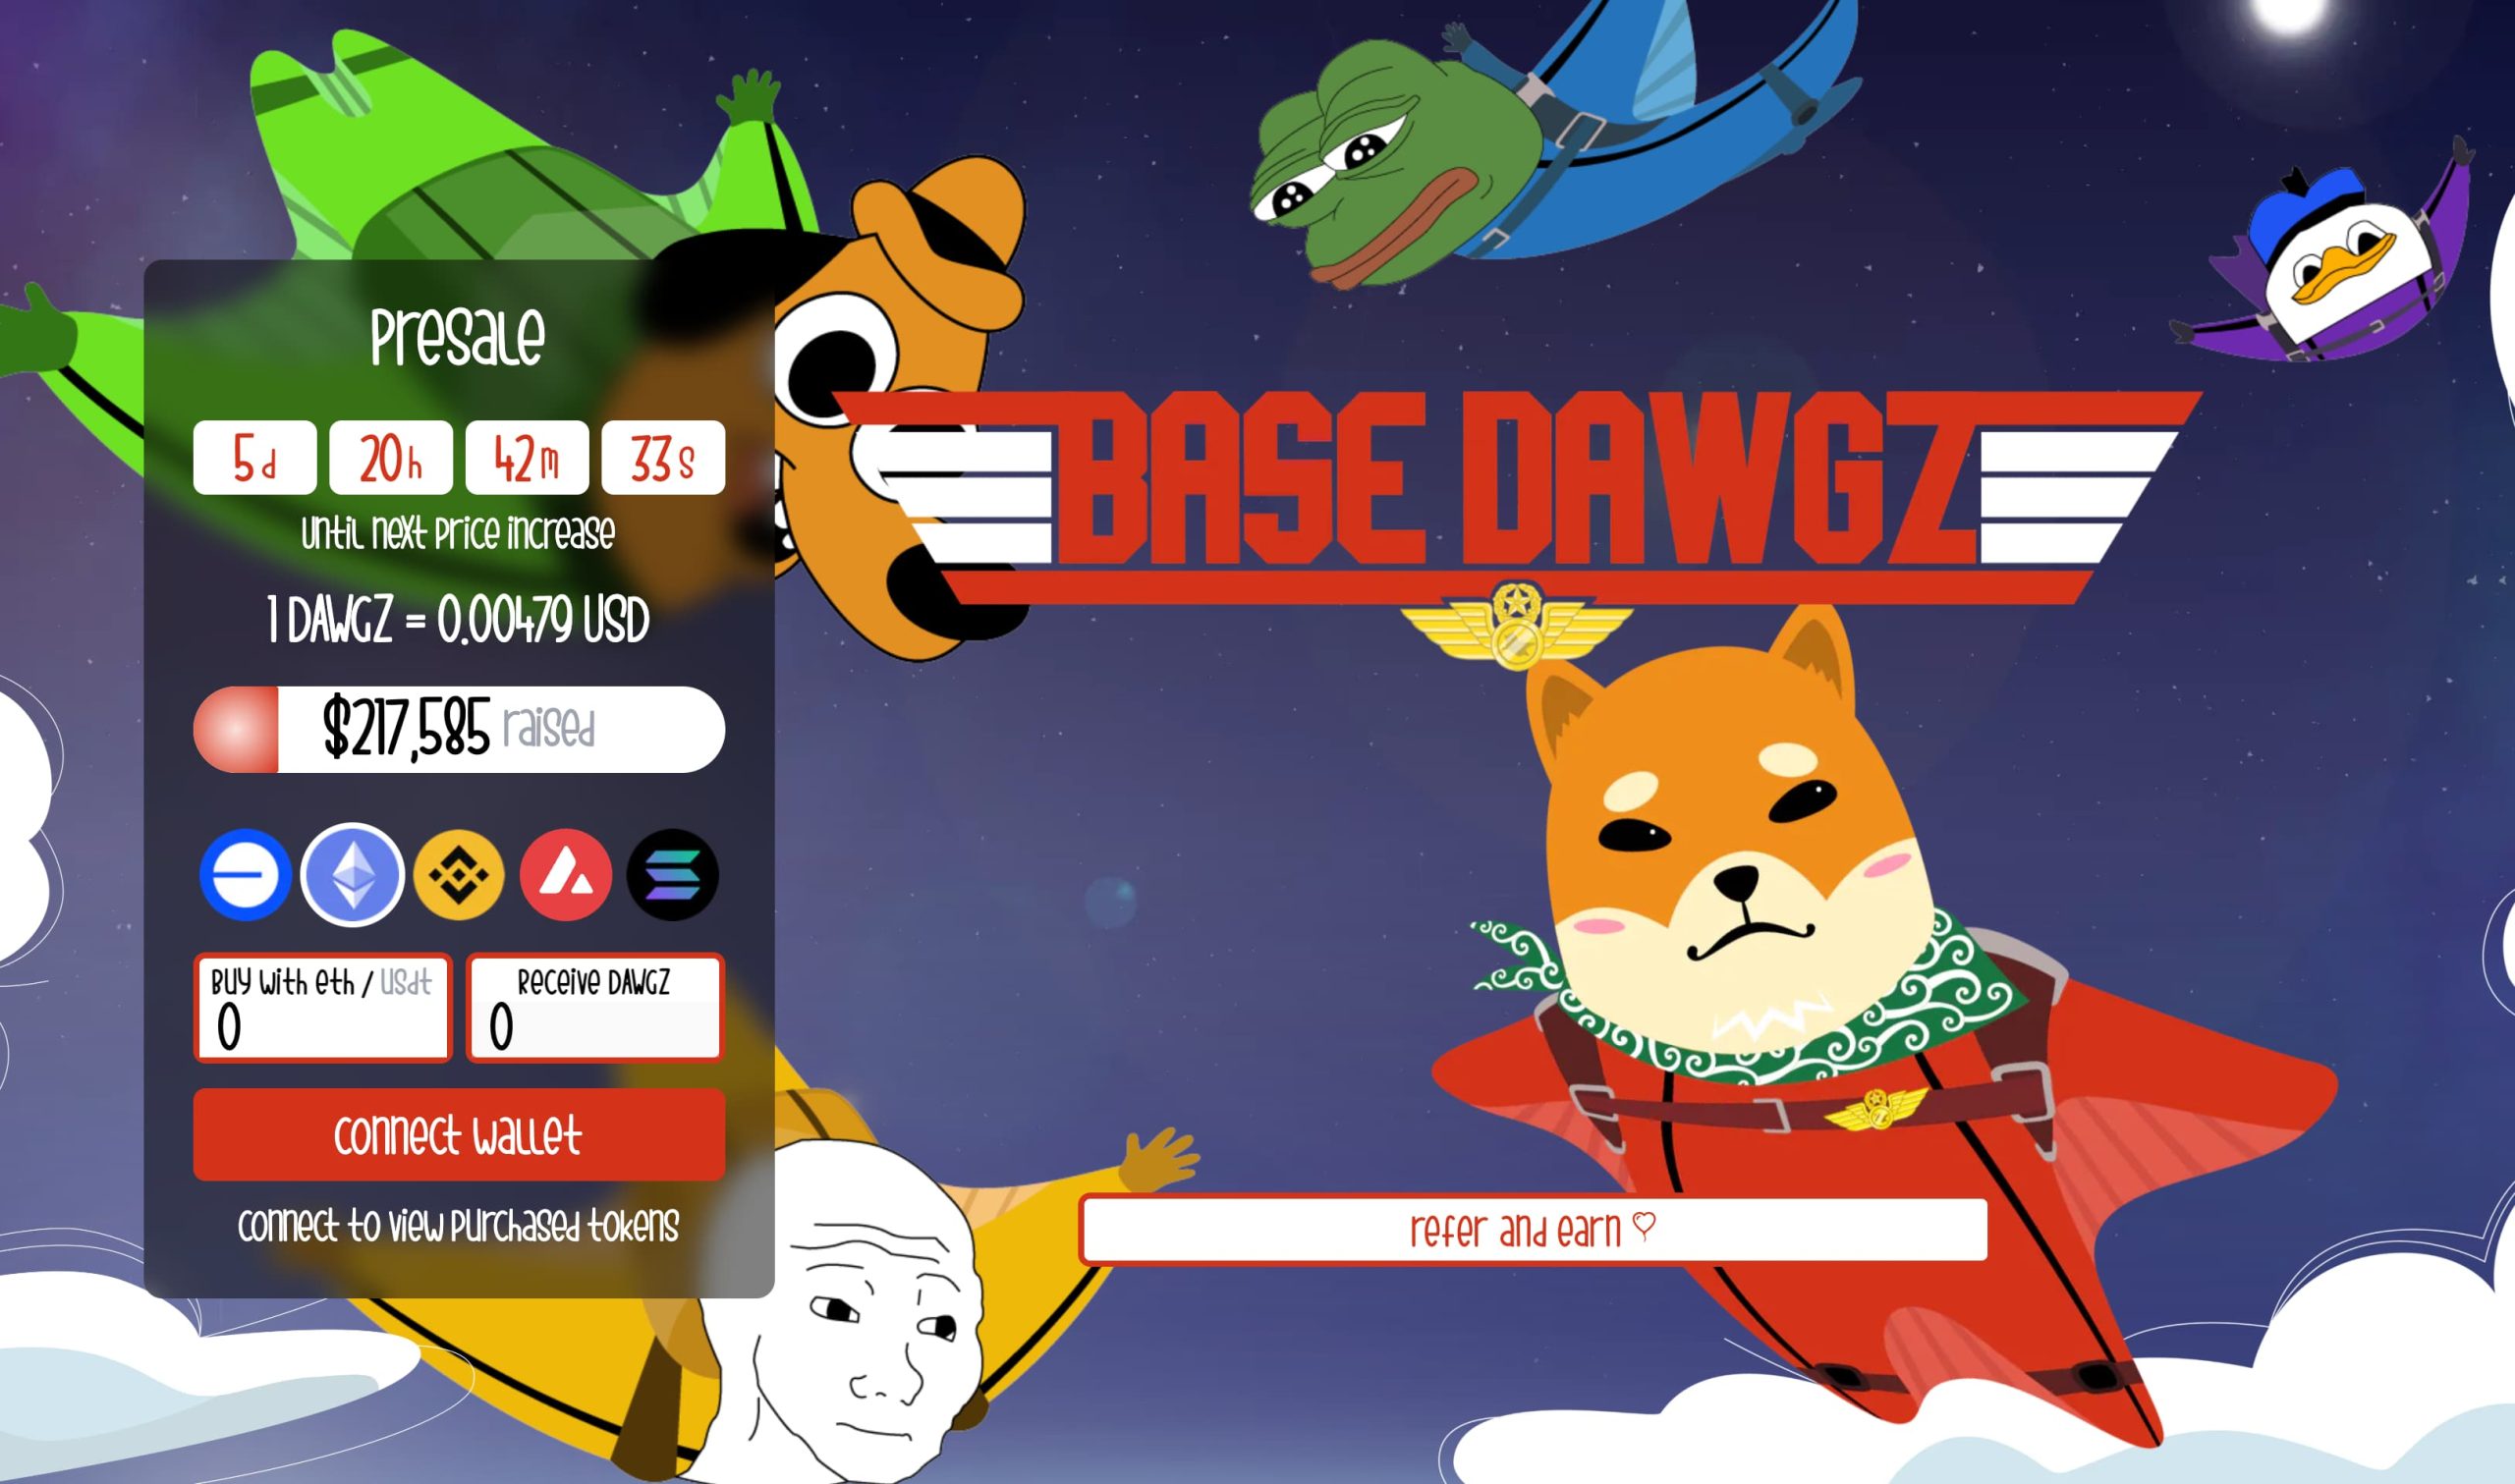 Base dawgz landing page with counter